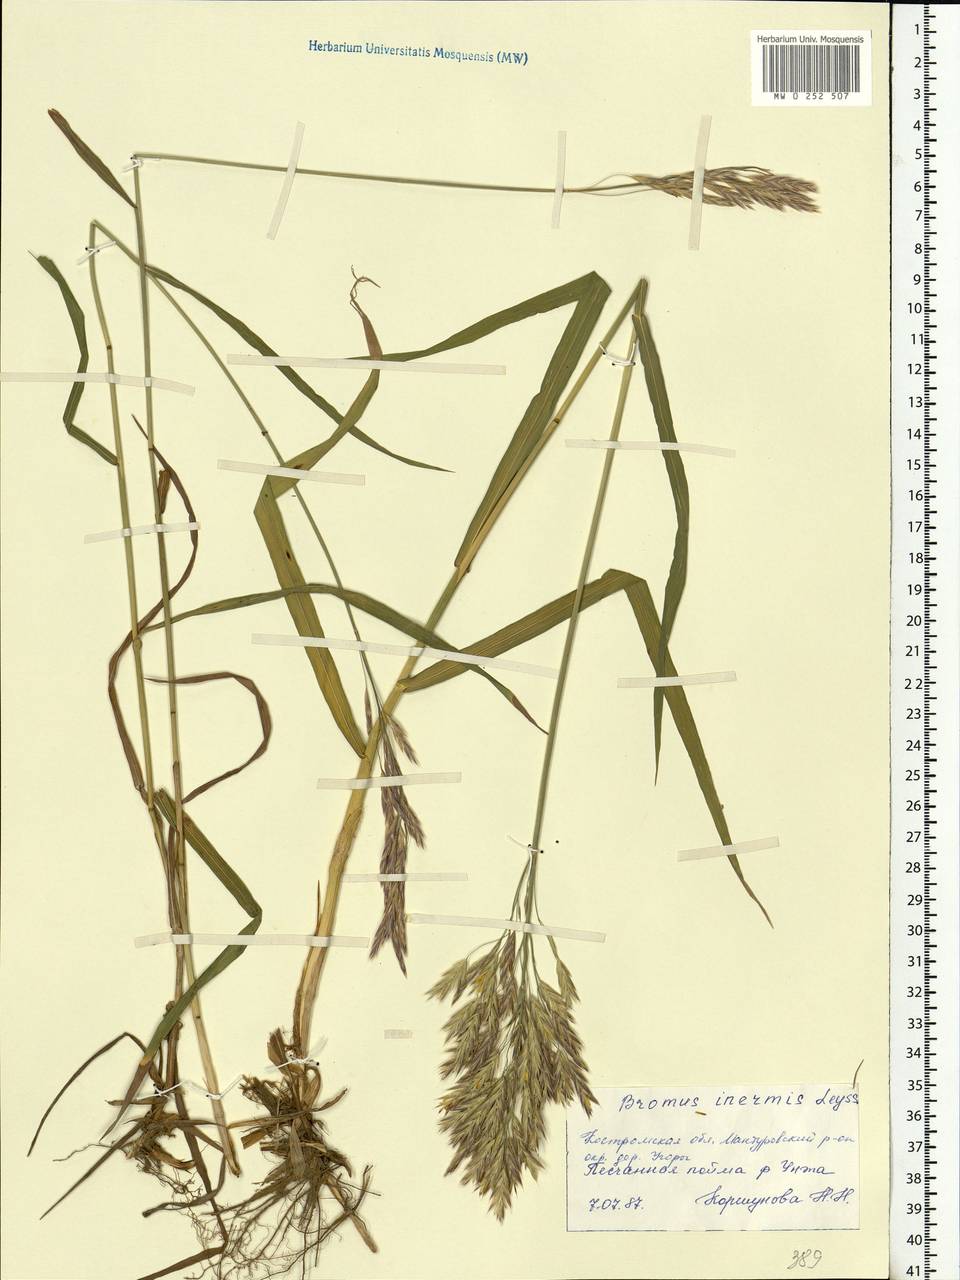 Bromus inermis Leyss., Eastern Europe, Central forest region (E5) (Russia)